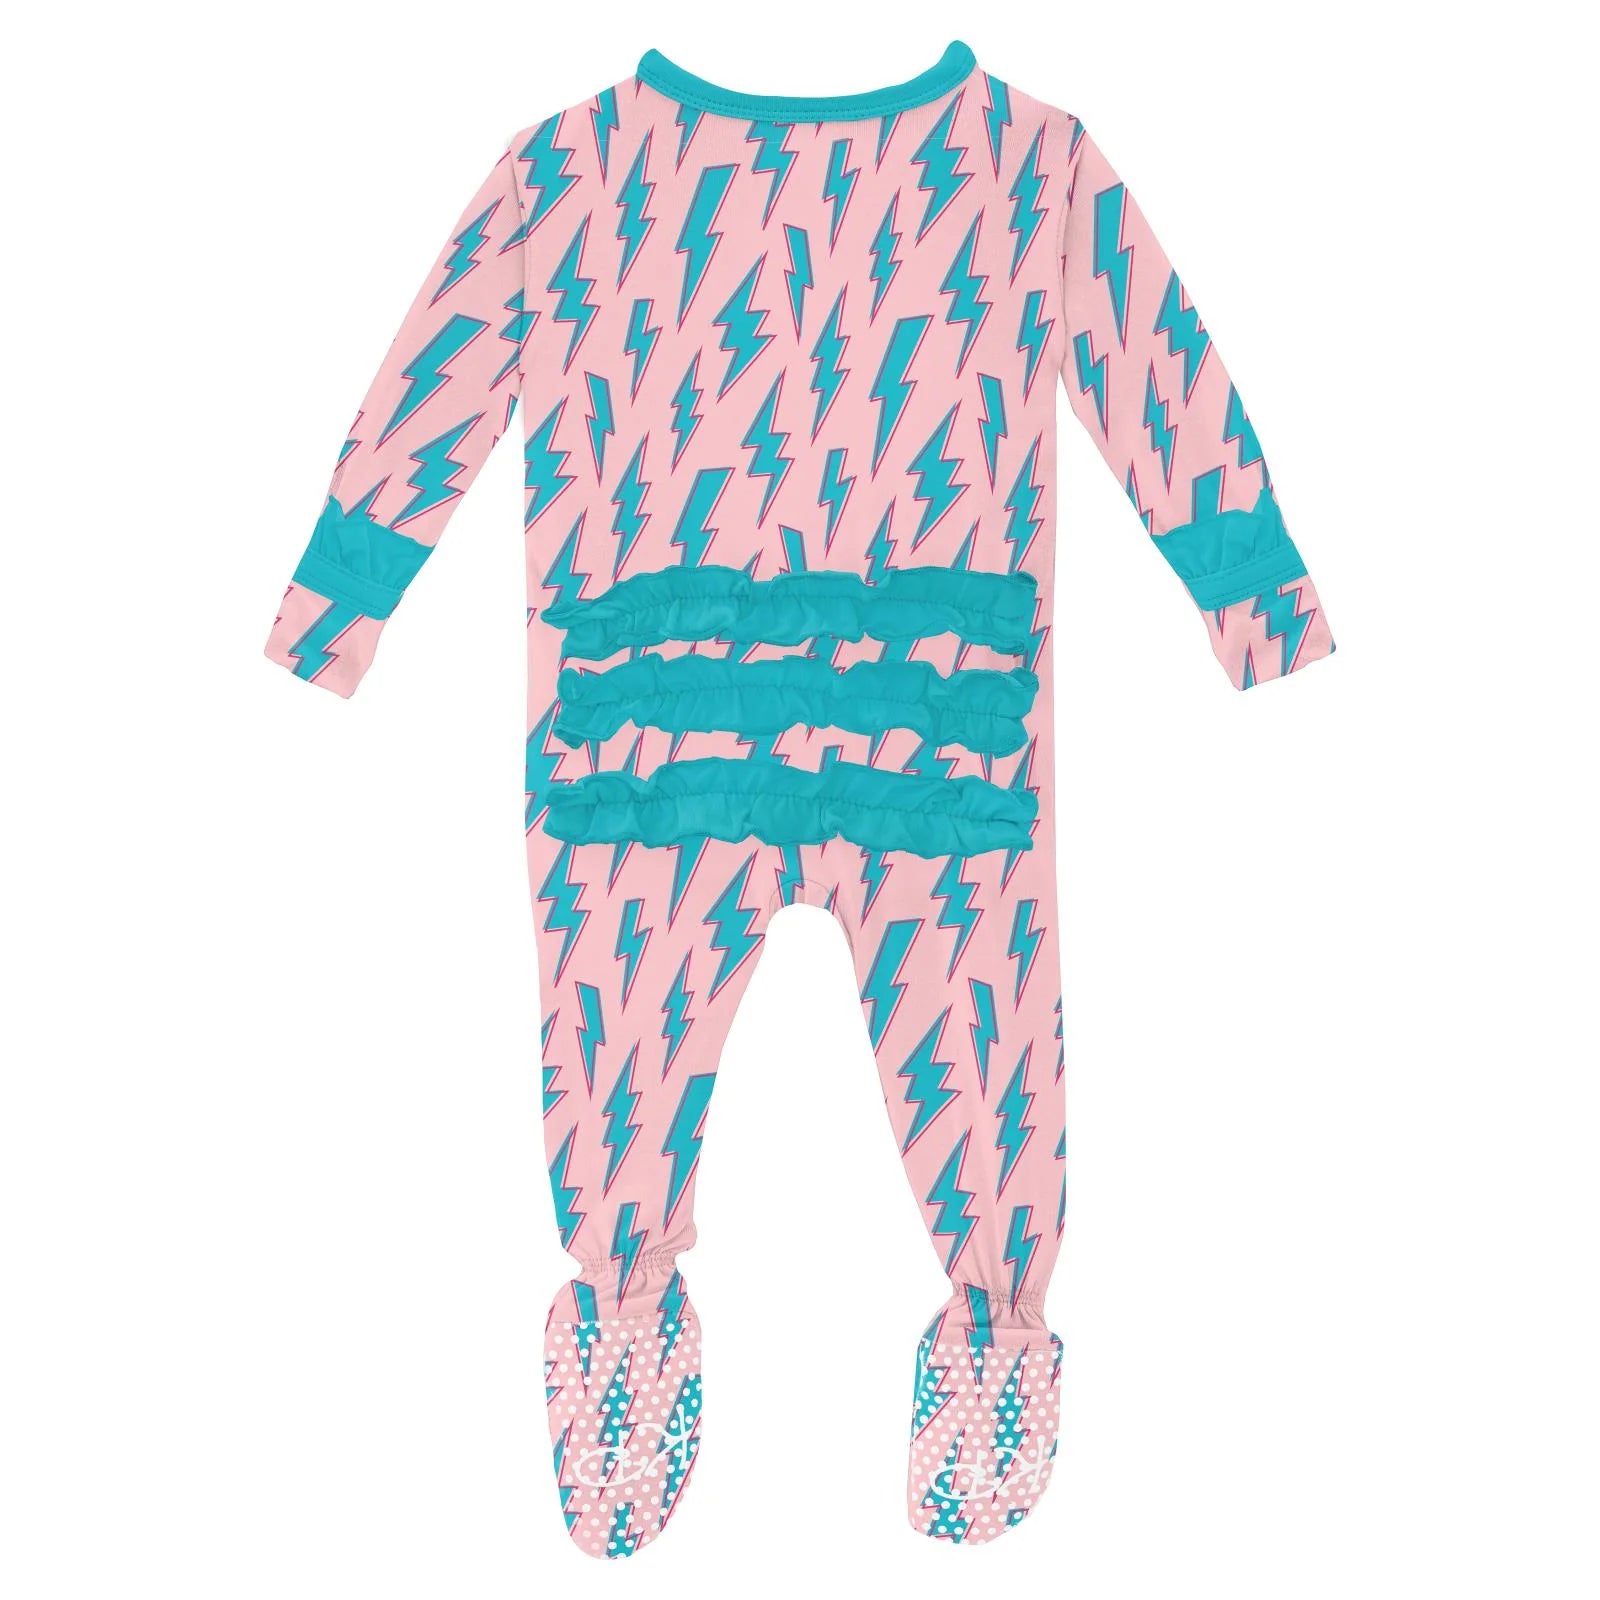 Print Classic Ruffle Footie with 2 Way Zipper in Lotus Lightning  - Doodlebug's Children's Boutique